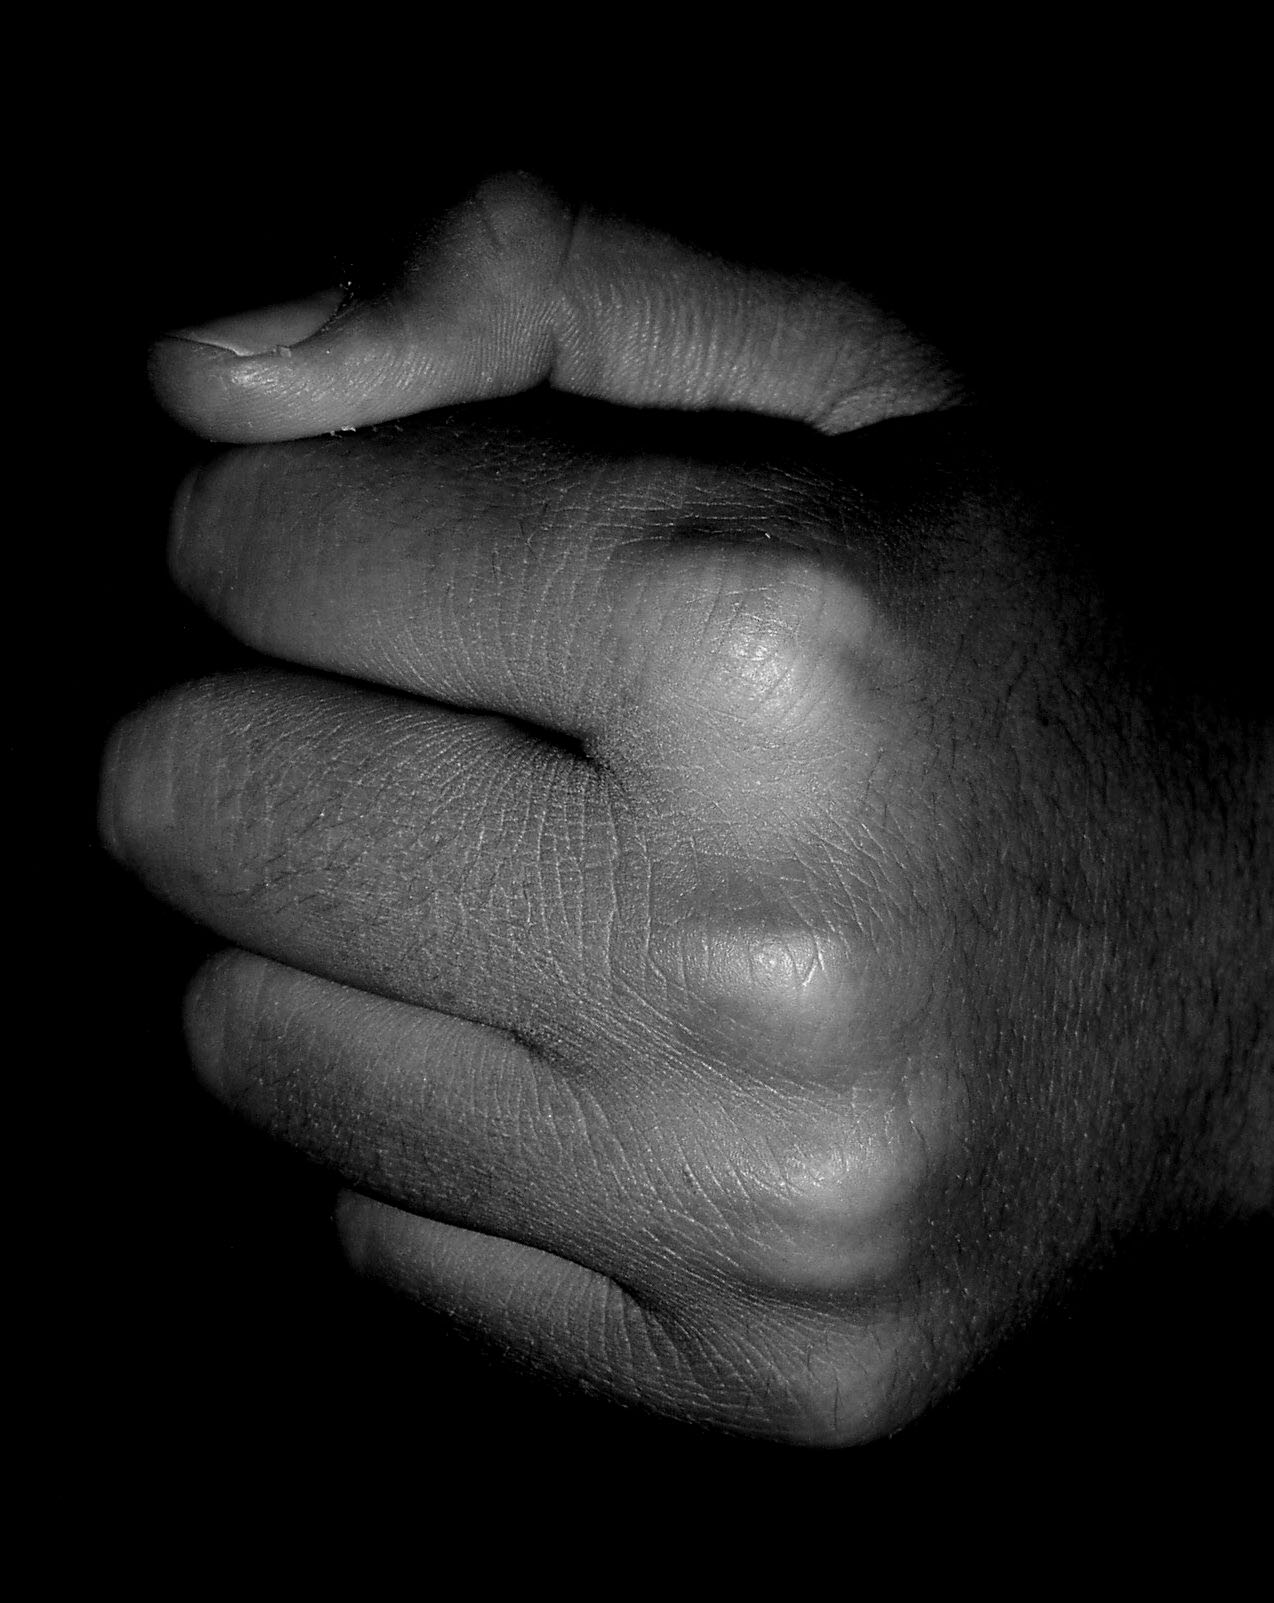 hands on a black background holding soing in their fingertips